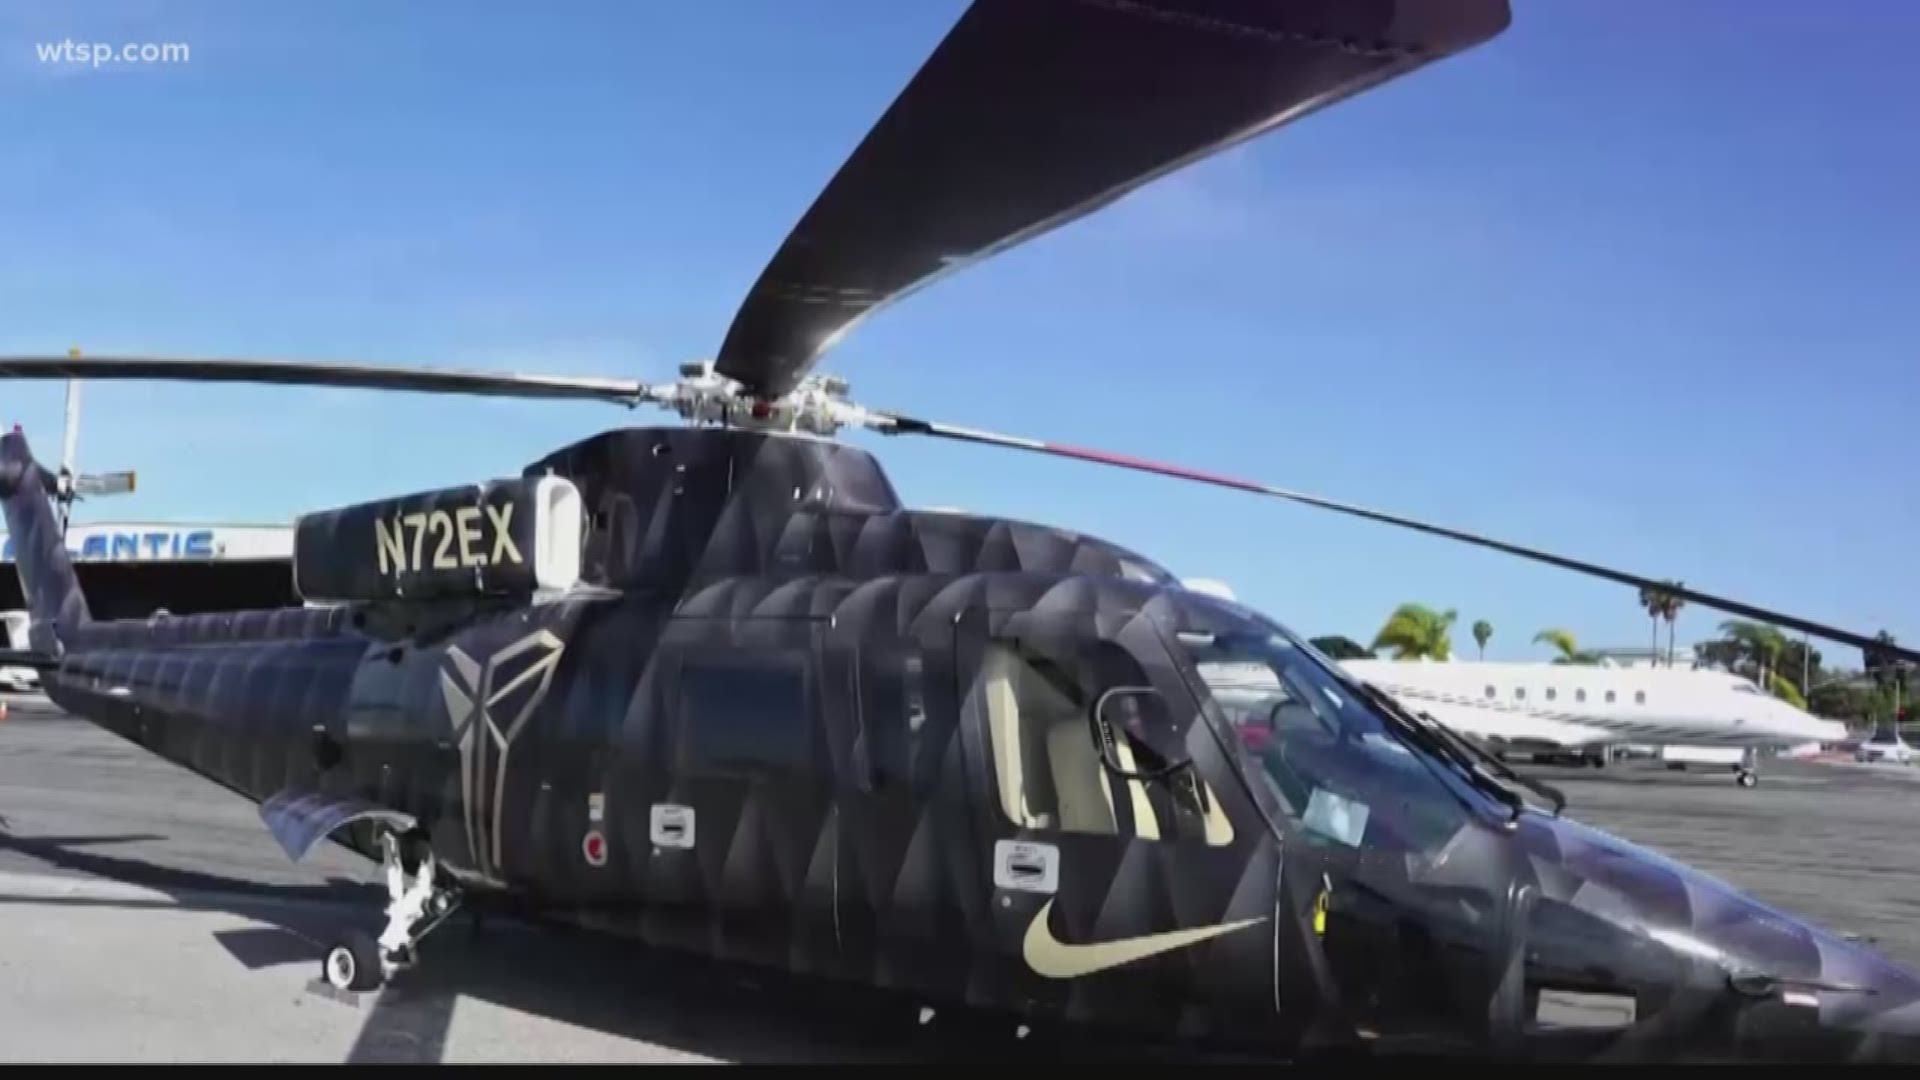 Kobe Bryant's private helicopter was a Sikorsky S-76 type.